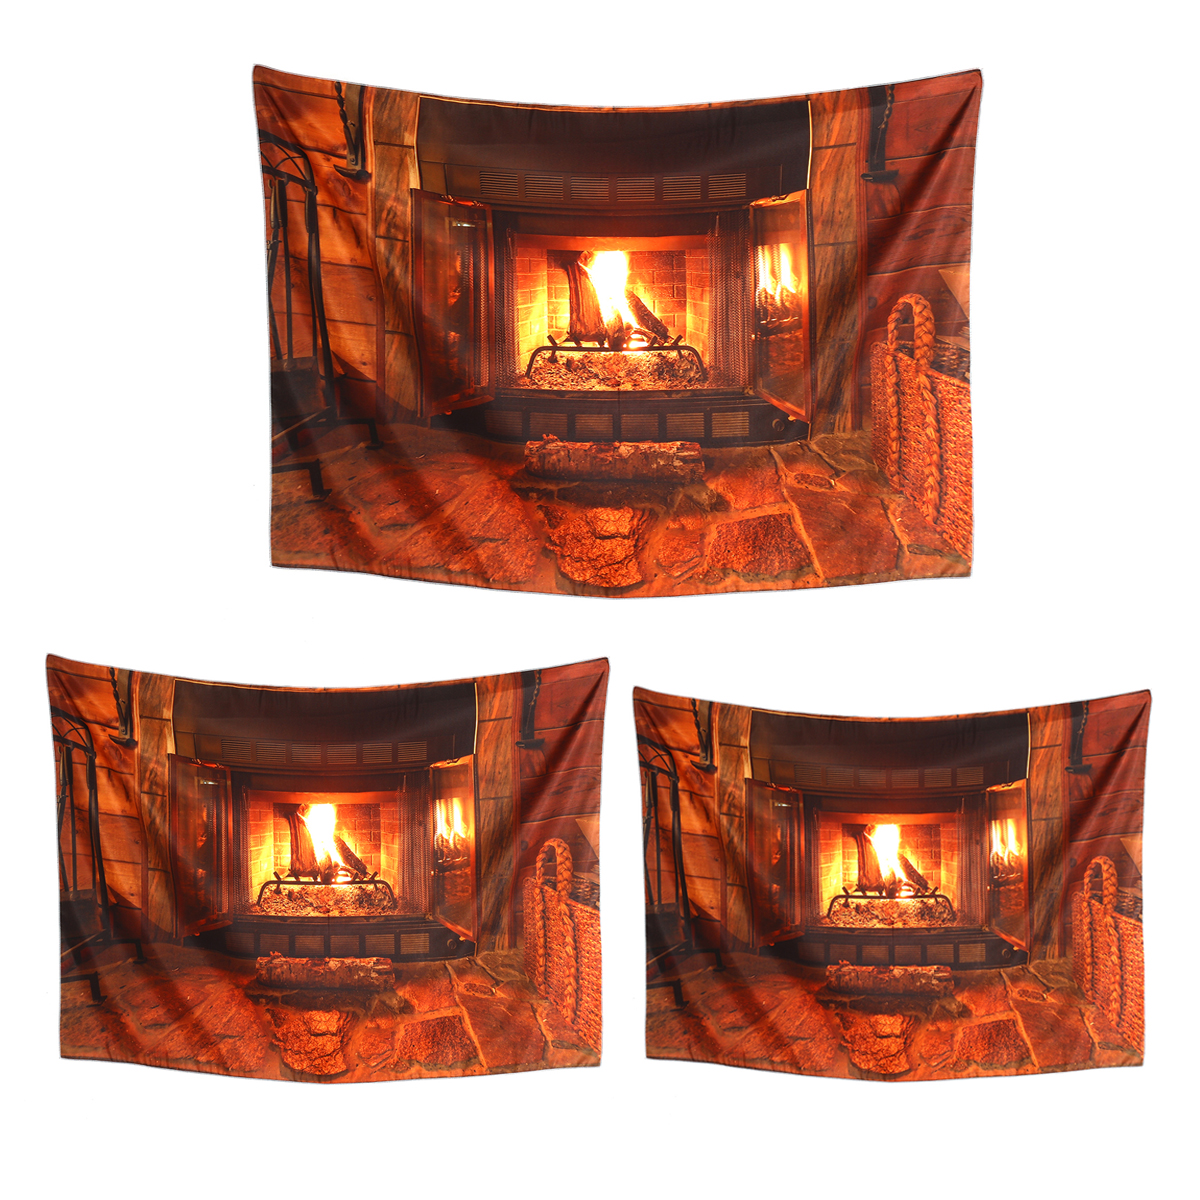 Polyester-Wall-Hanging-Tapestry-Art-Home-Decor-Fireplace-Pattern-Blankets-For-Home-Bedroom-Porch-Han-1636374-1